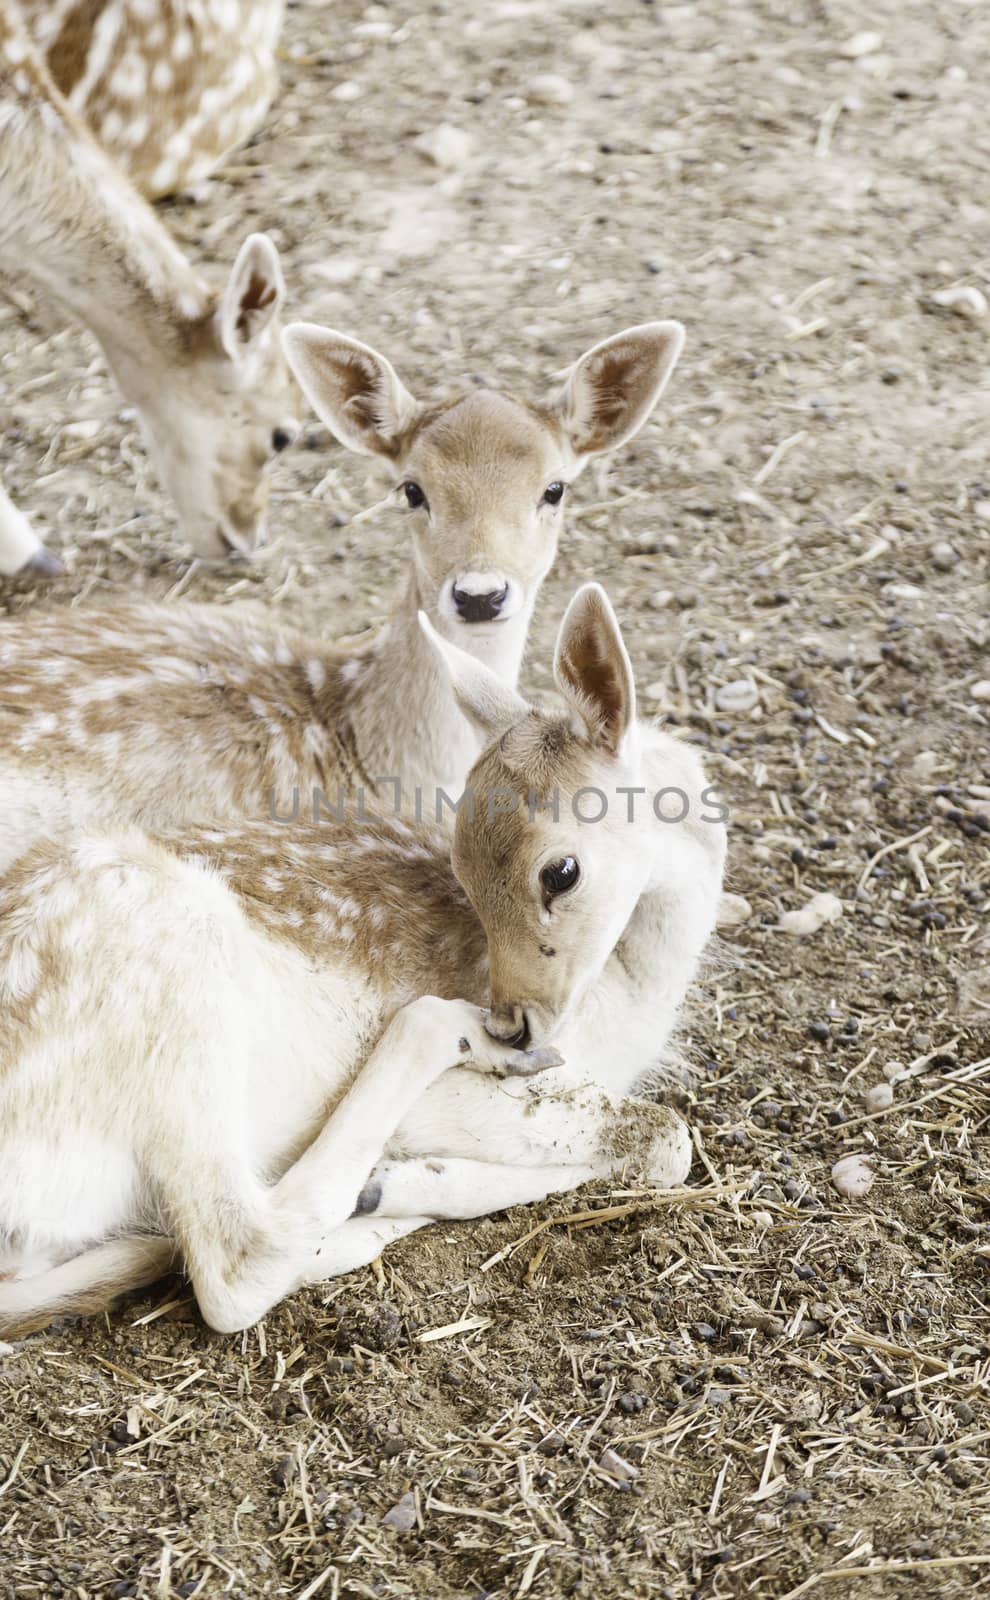 Young deer in a zoo, detail of a young mammals, natural beauty